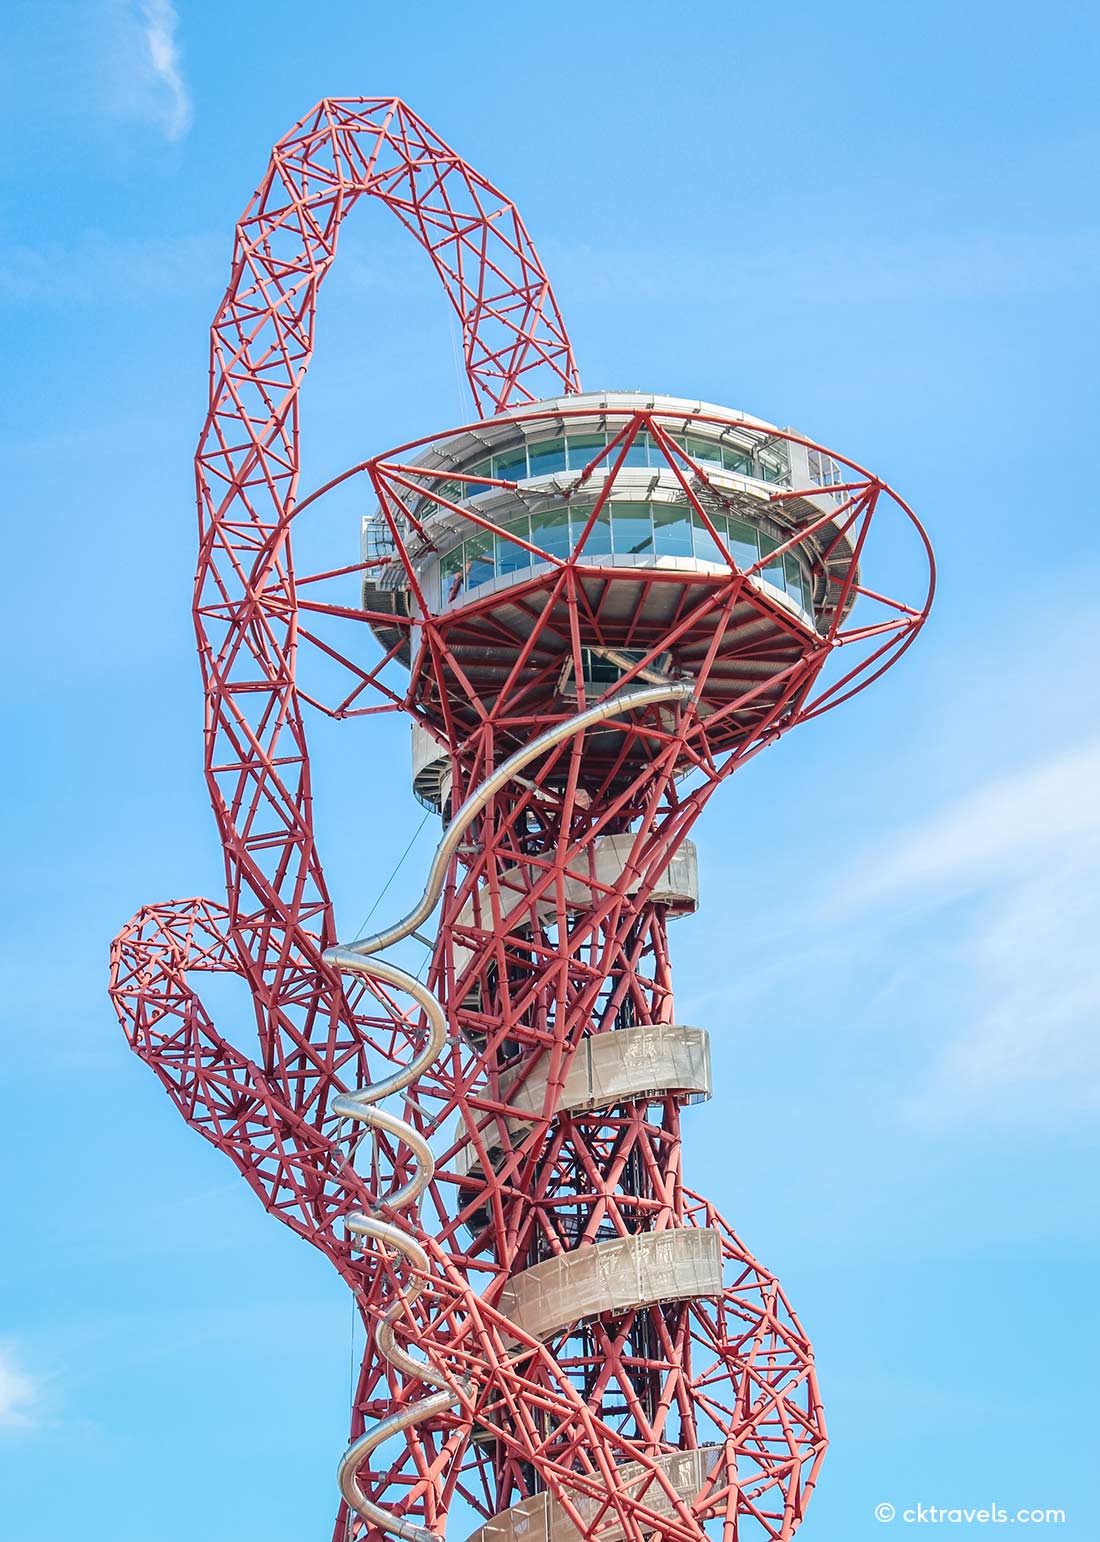 View from ArcelorMittal Orbit / The Slide Stratford London